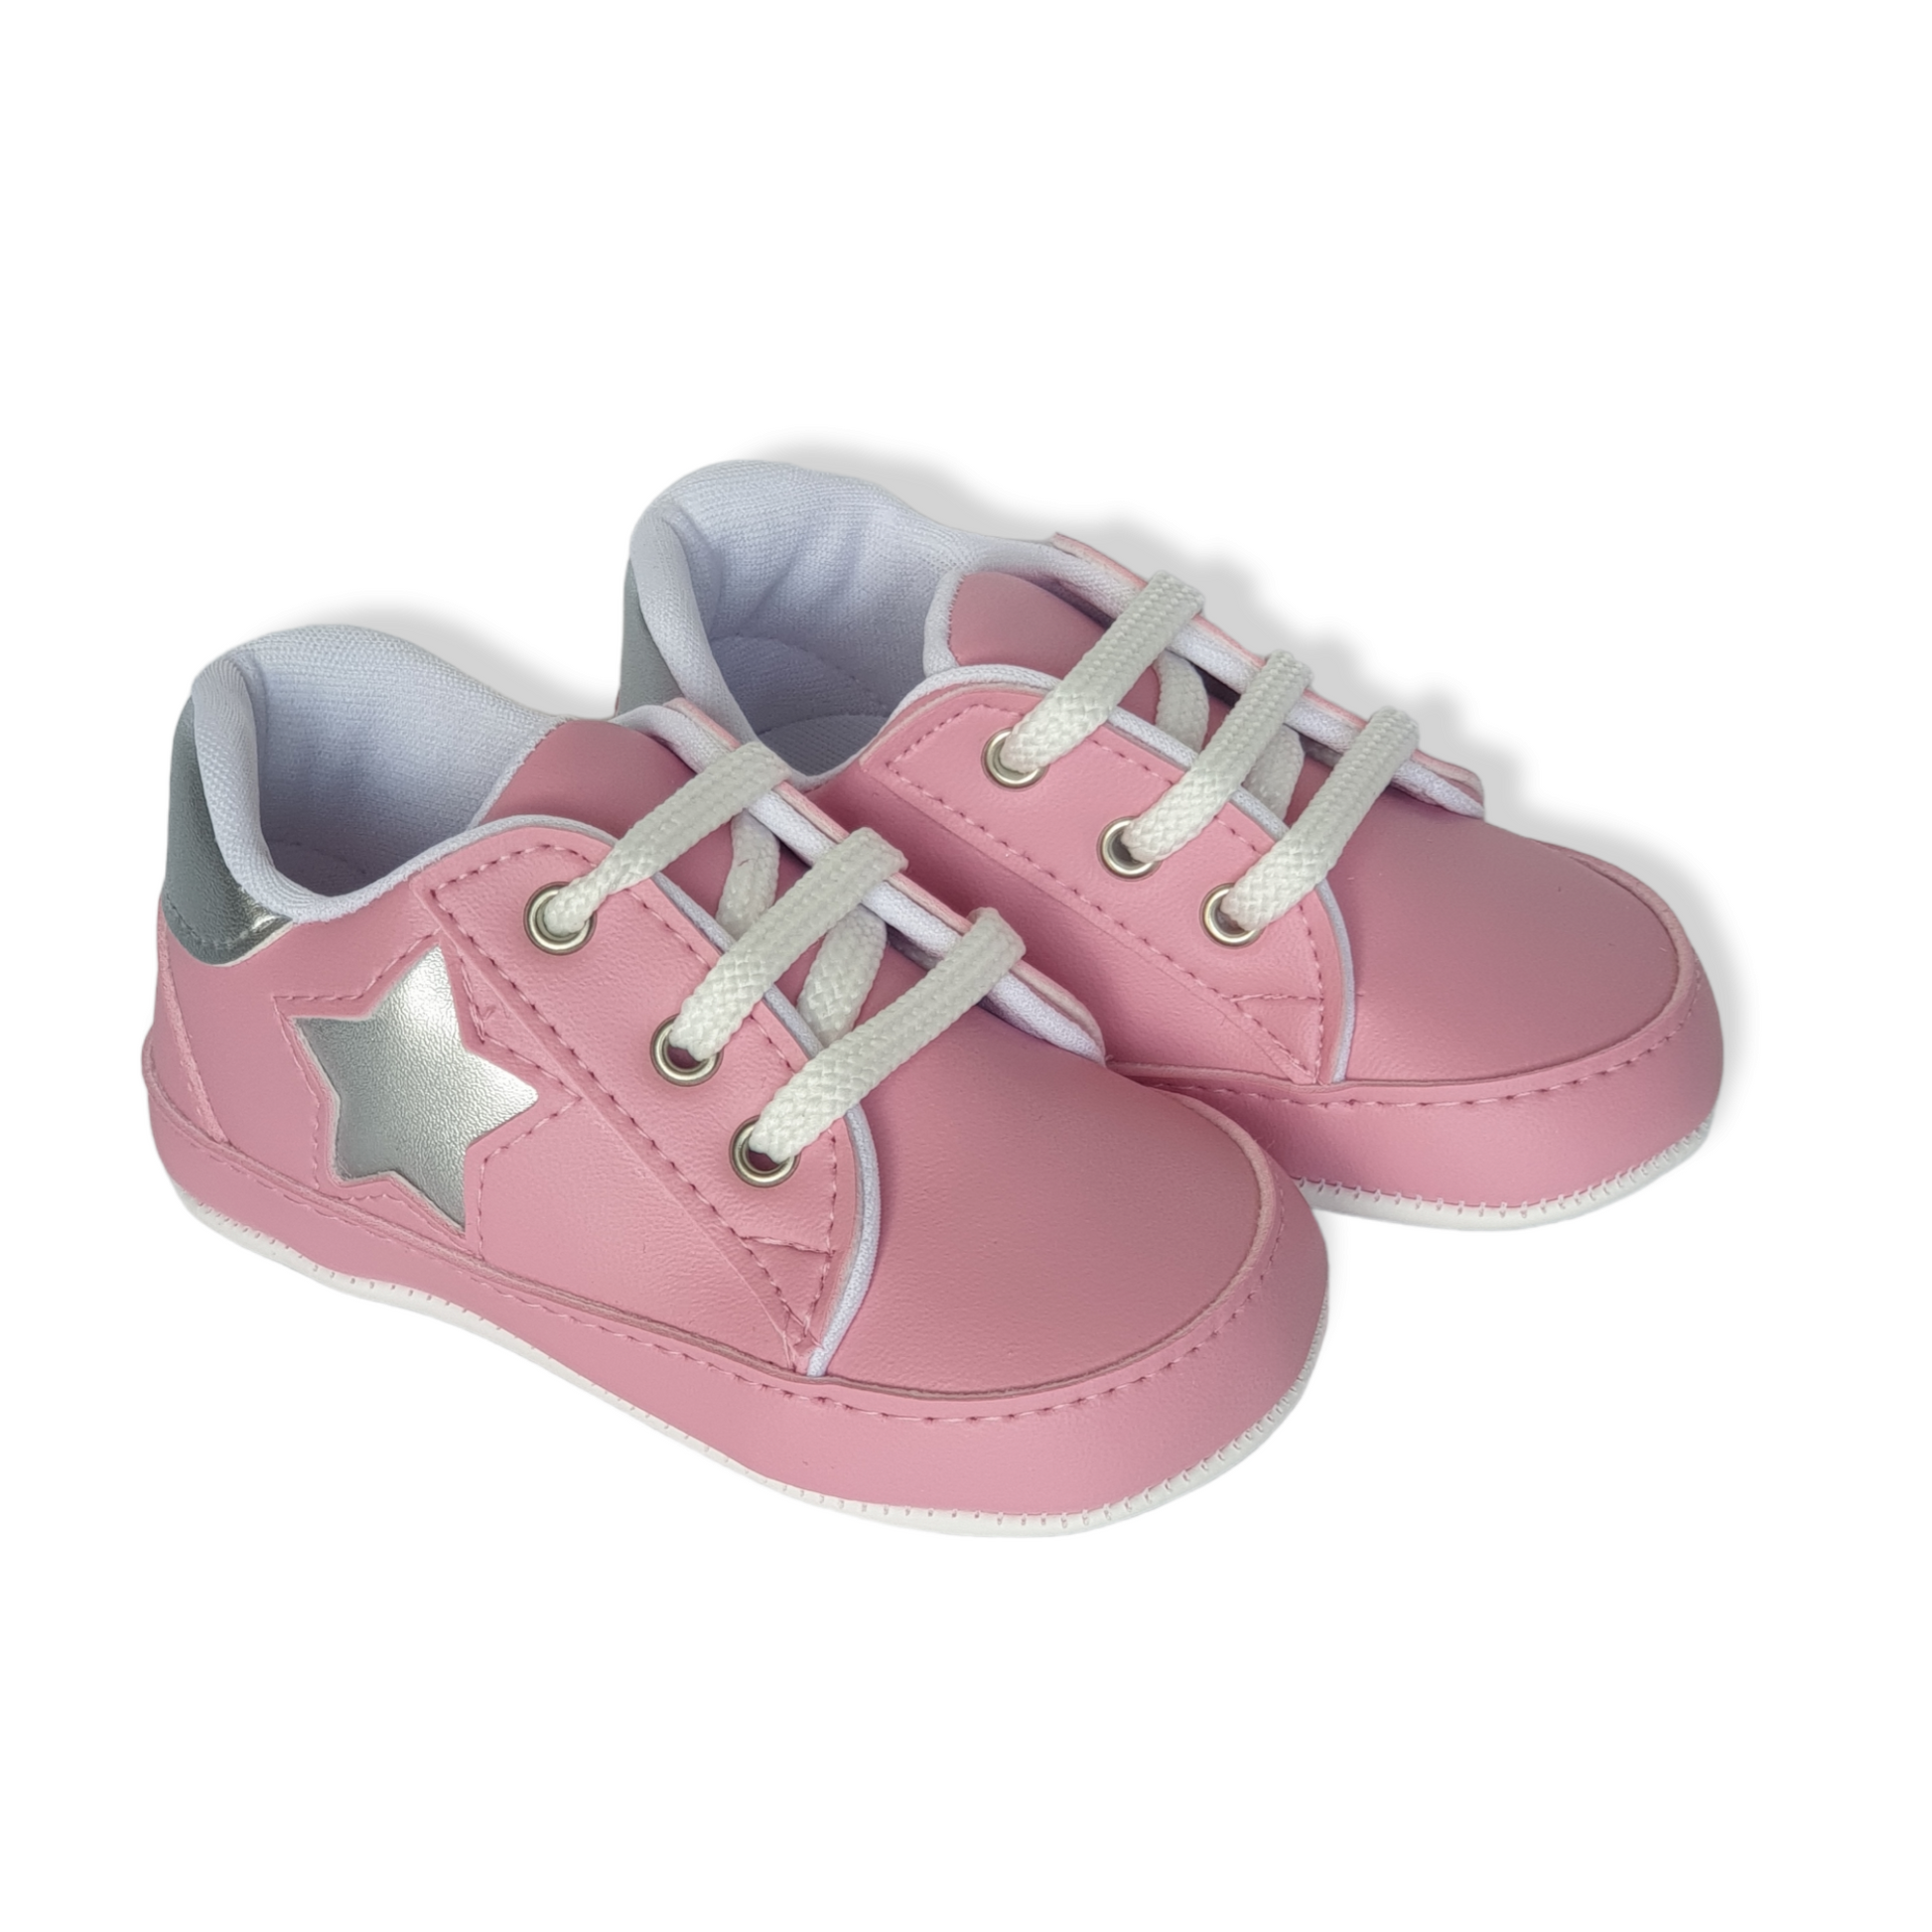 Star Pink Sport Baby Shoes-Baby shoe, Boots, catgirl, catshoes, Pink, Shoe, Shoes, Silver, Sneakers, Sport, Star-Papulin-[Too Twee]-[Tootwee]-[baby]-[newborn]-[clothes]-[essentials]-[toys]-[Lebanon]